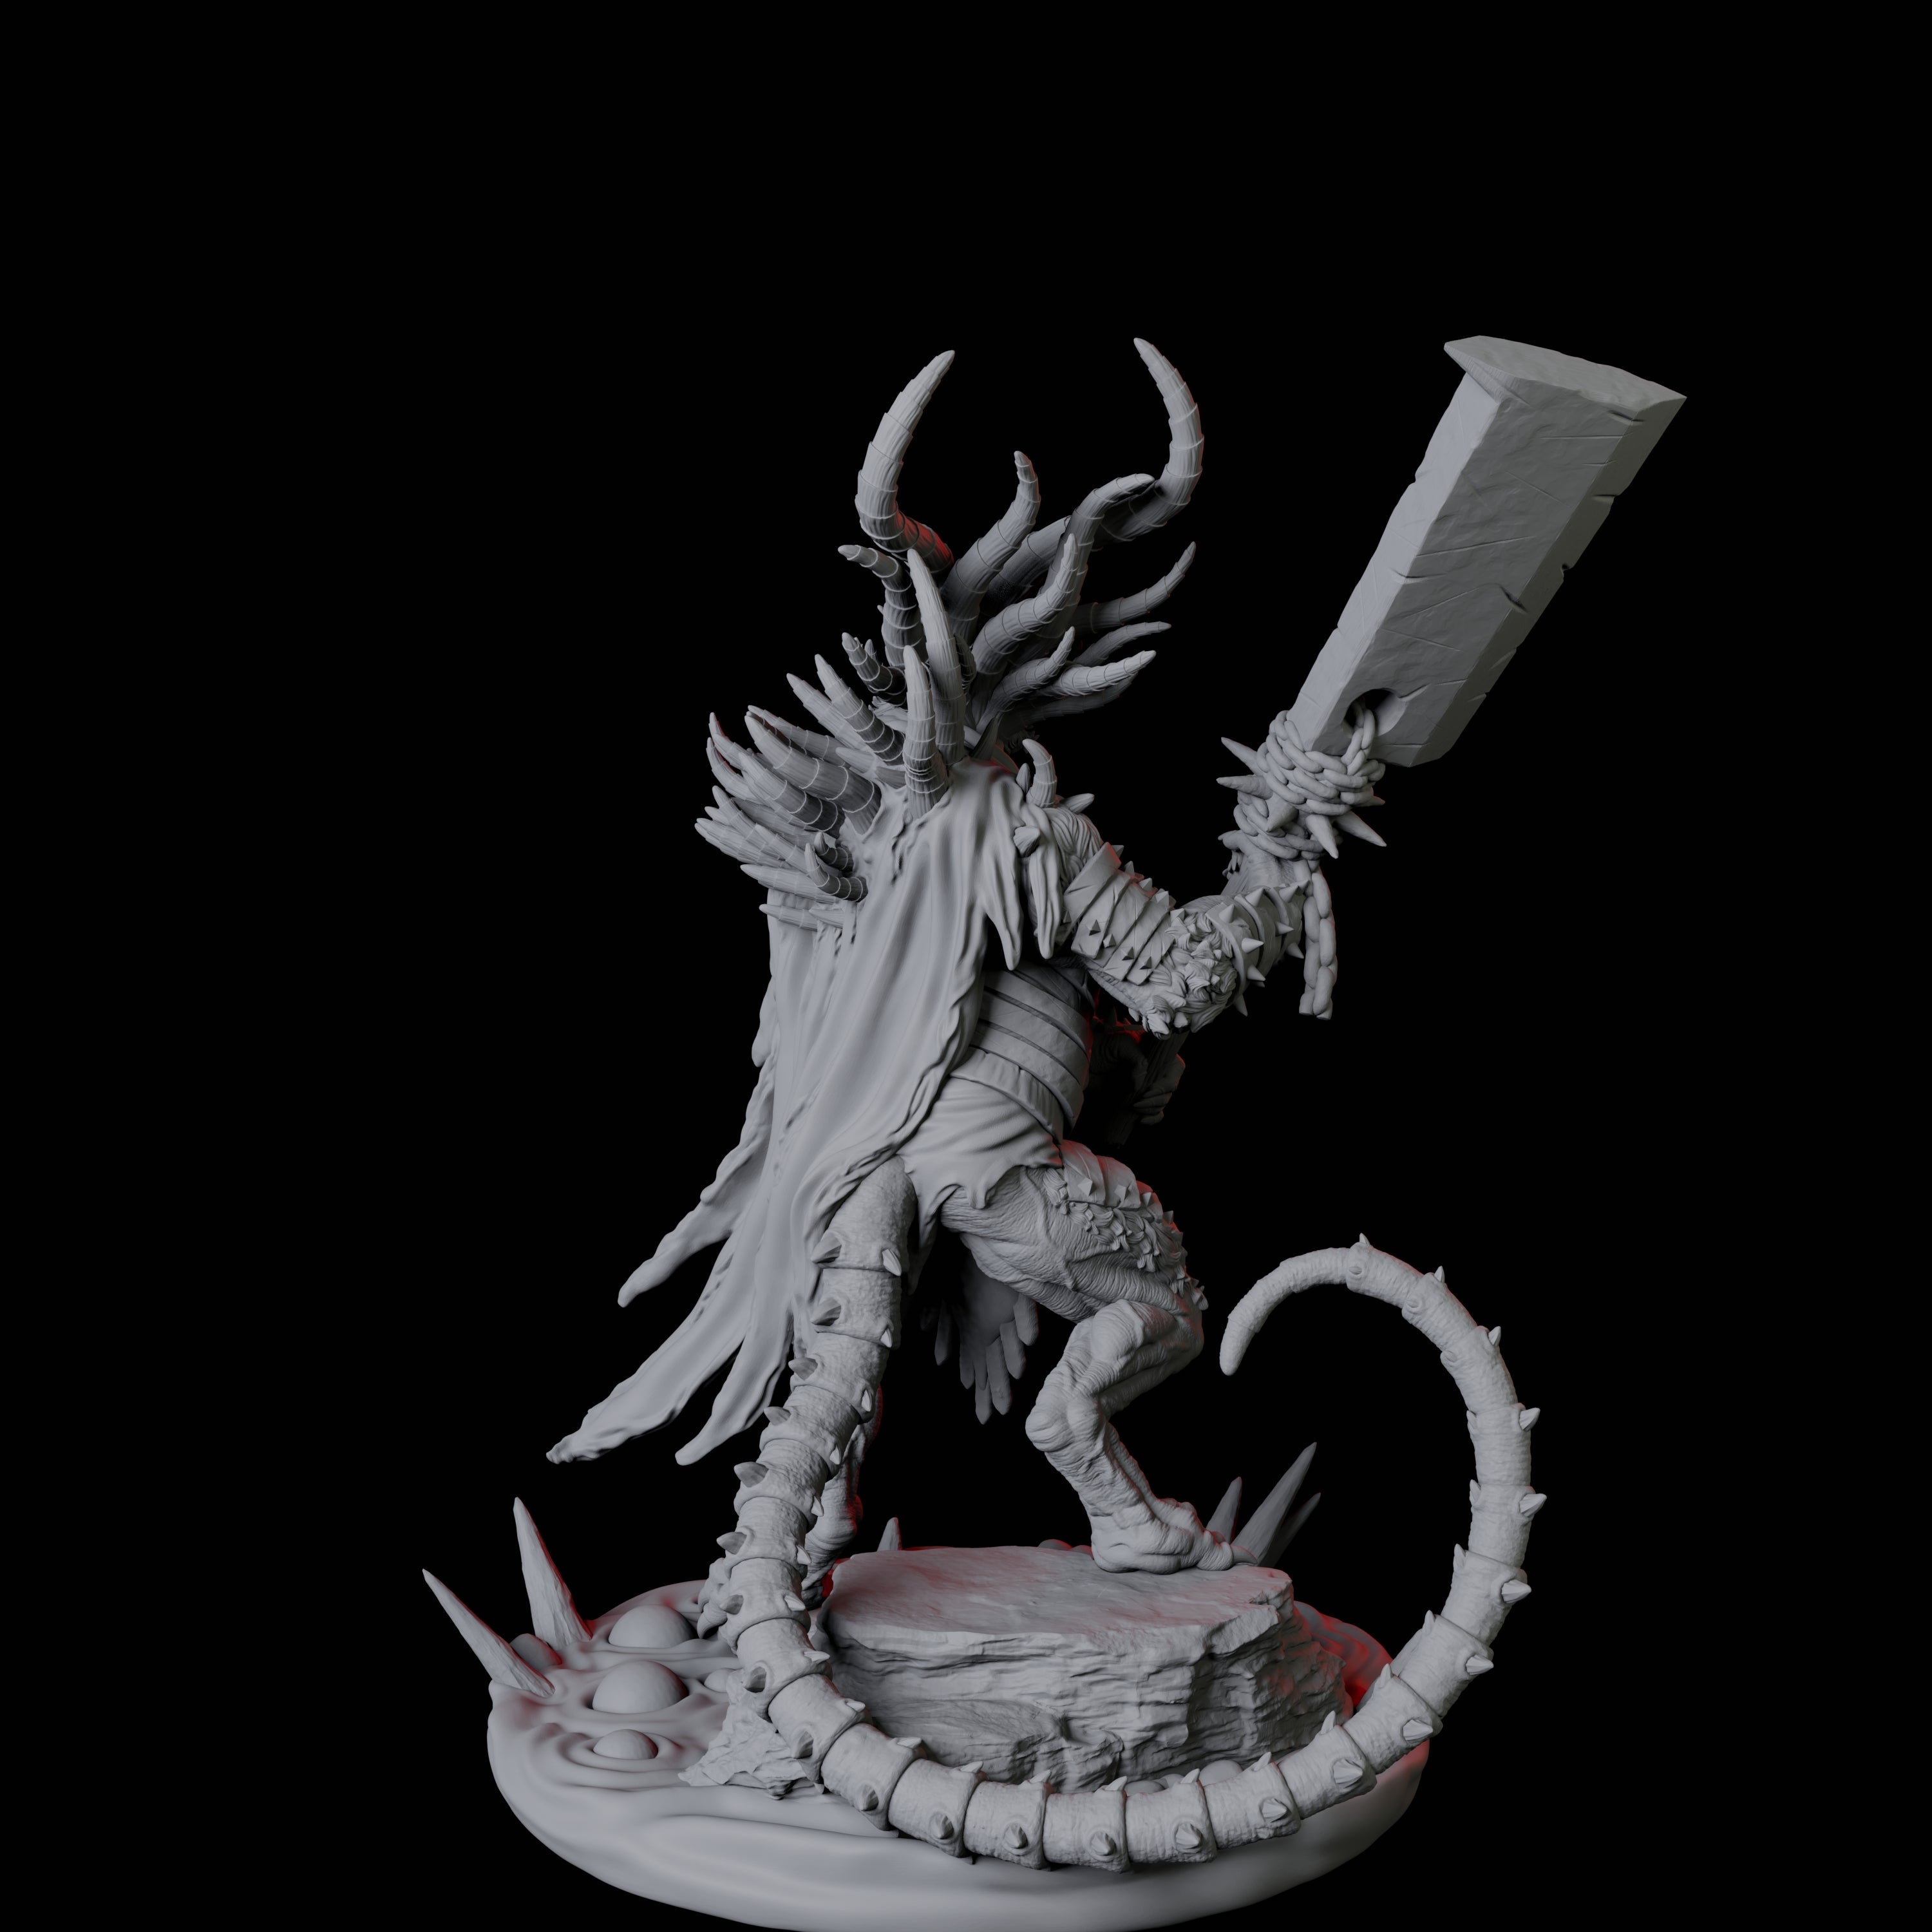 Ratfolk Filth Paladin A Miniature for Dungeons and Dragons, Pathfinder or other TTRPGs